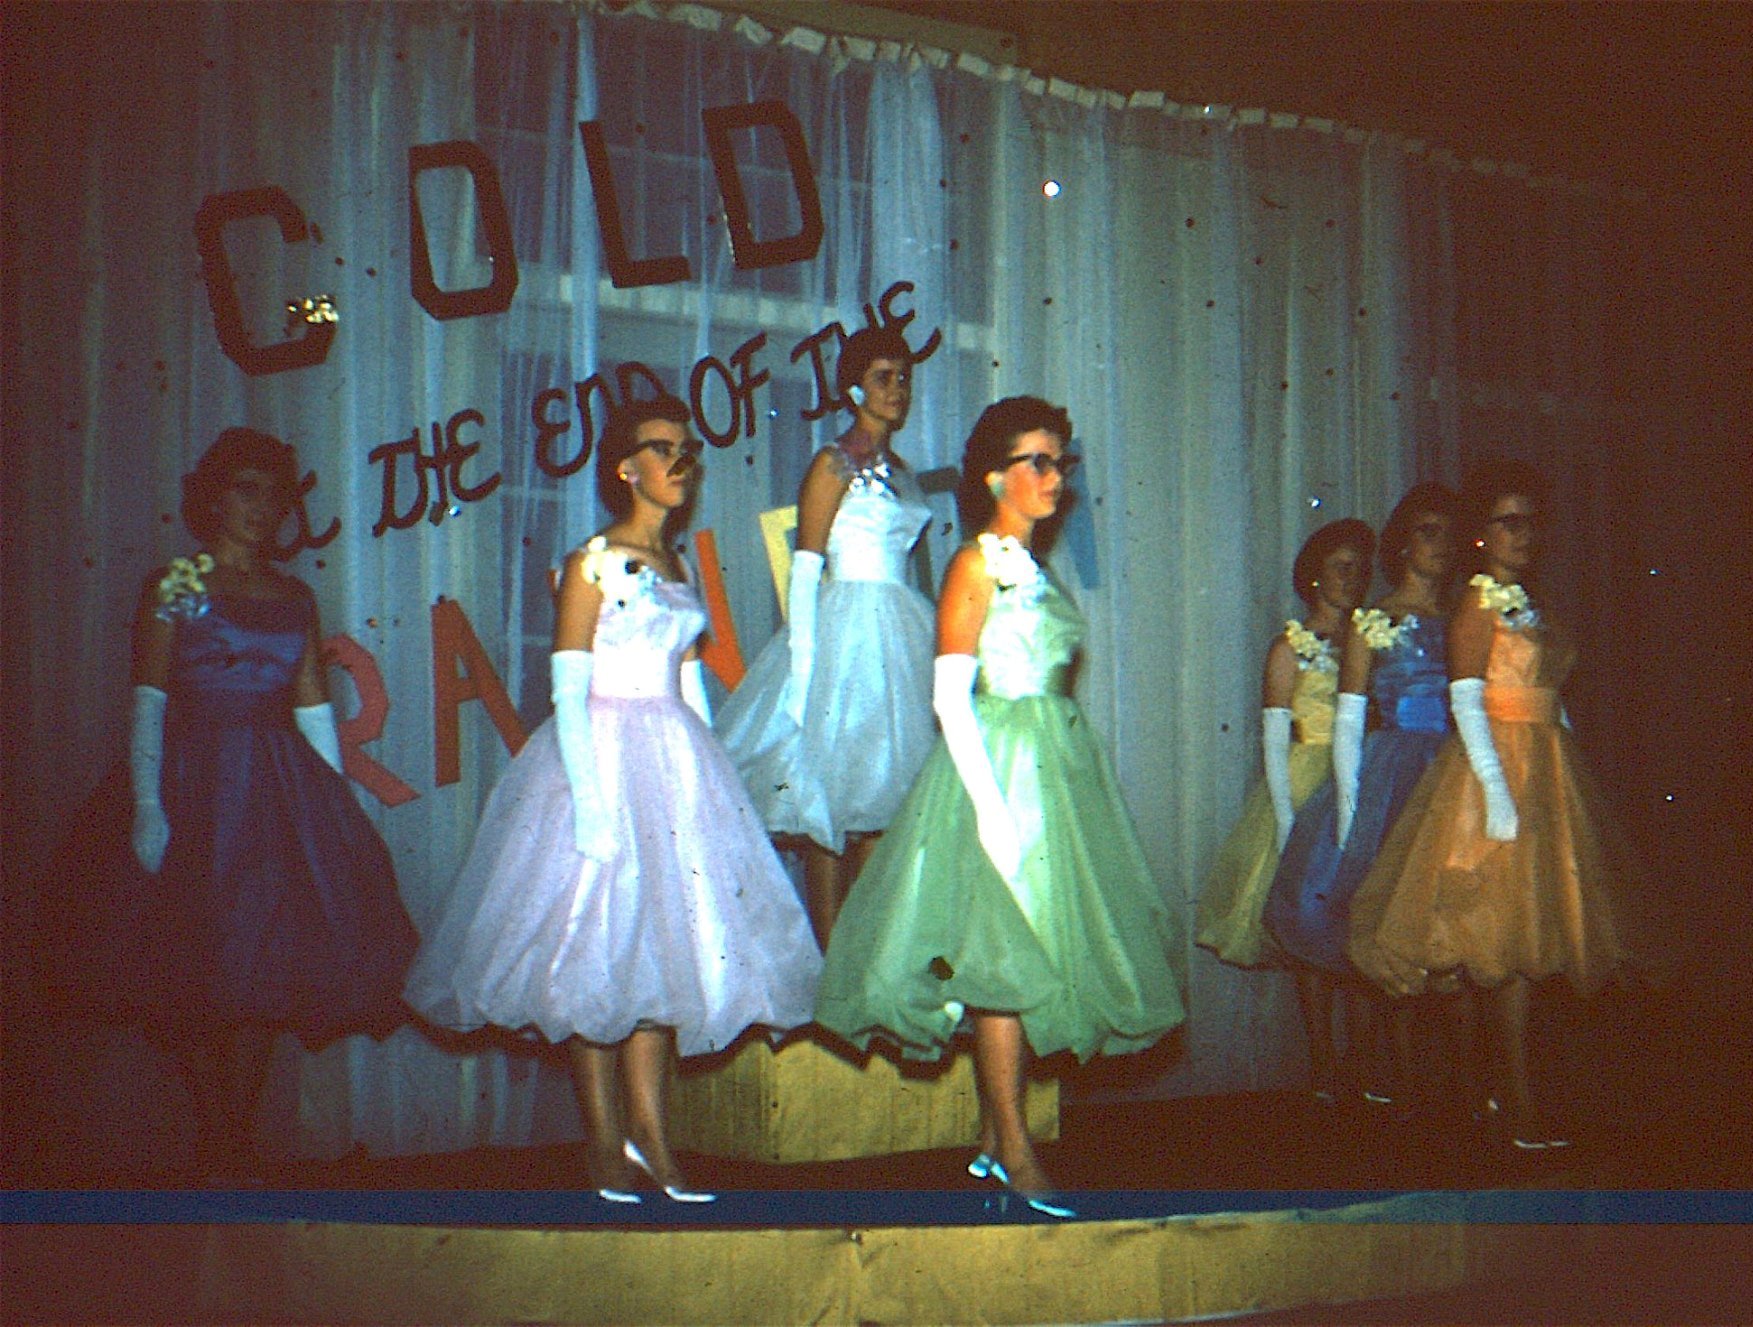 A Dixie College D-Day queen and her court